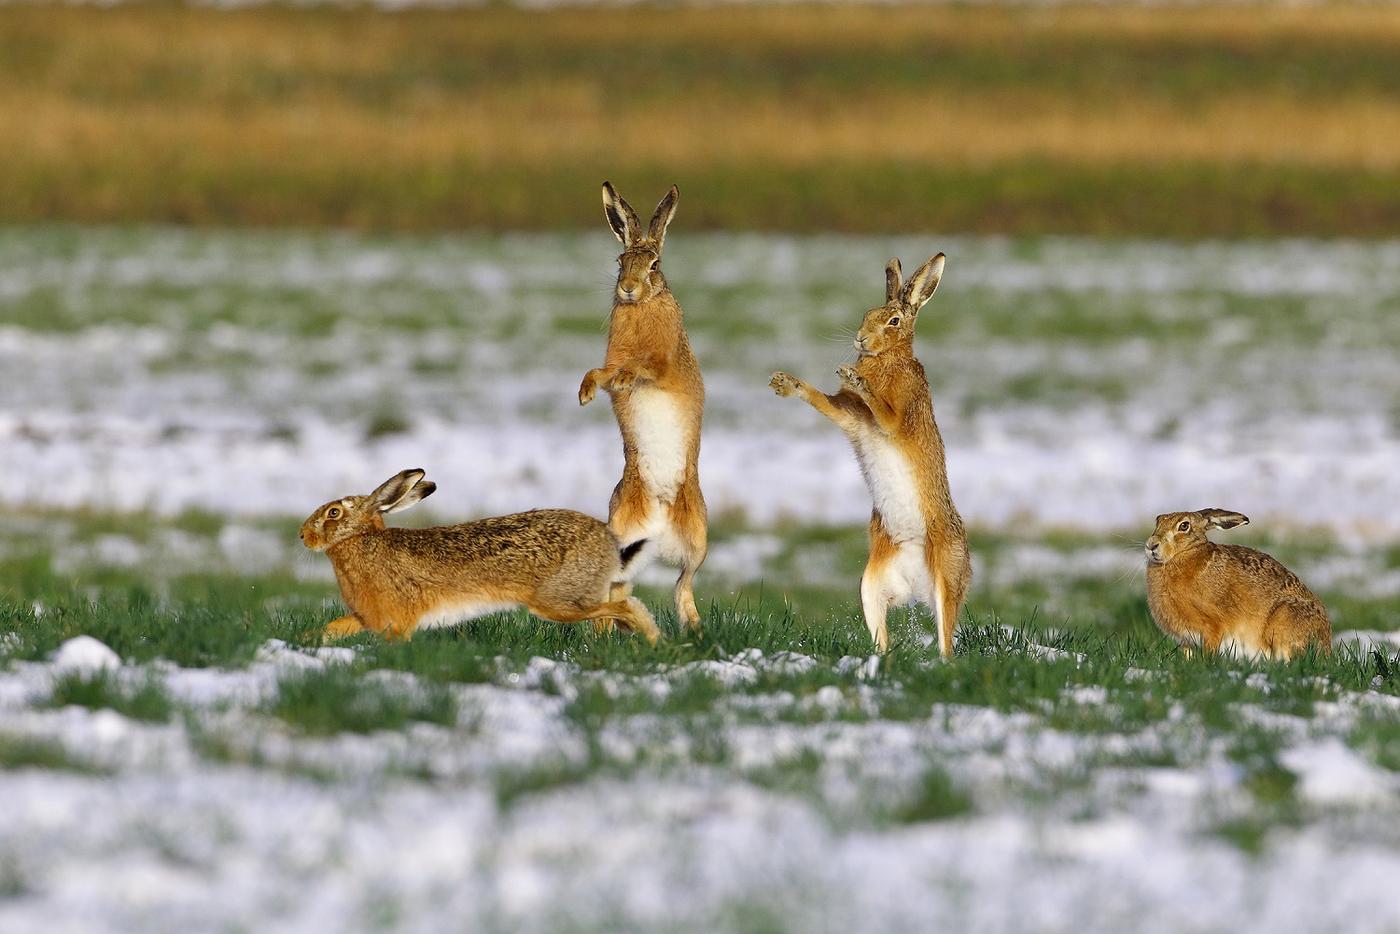 Field hares fighting in snow-covered fields